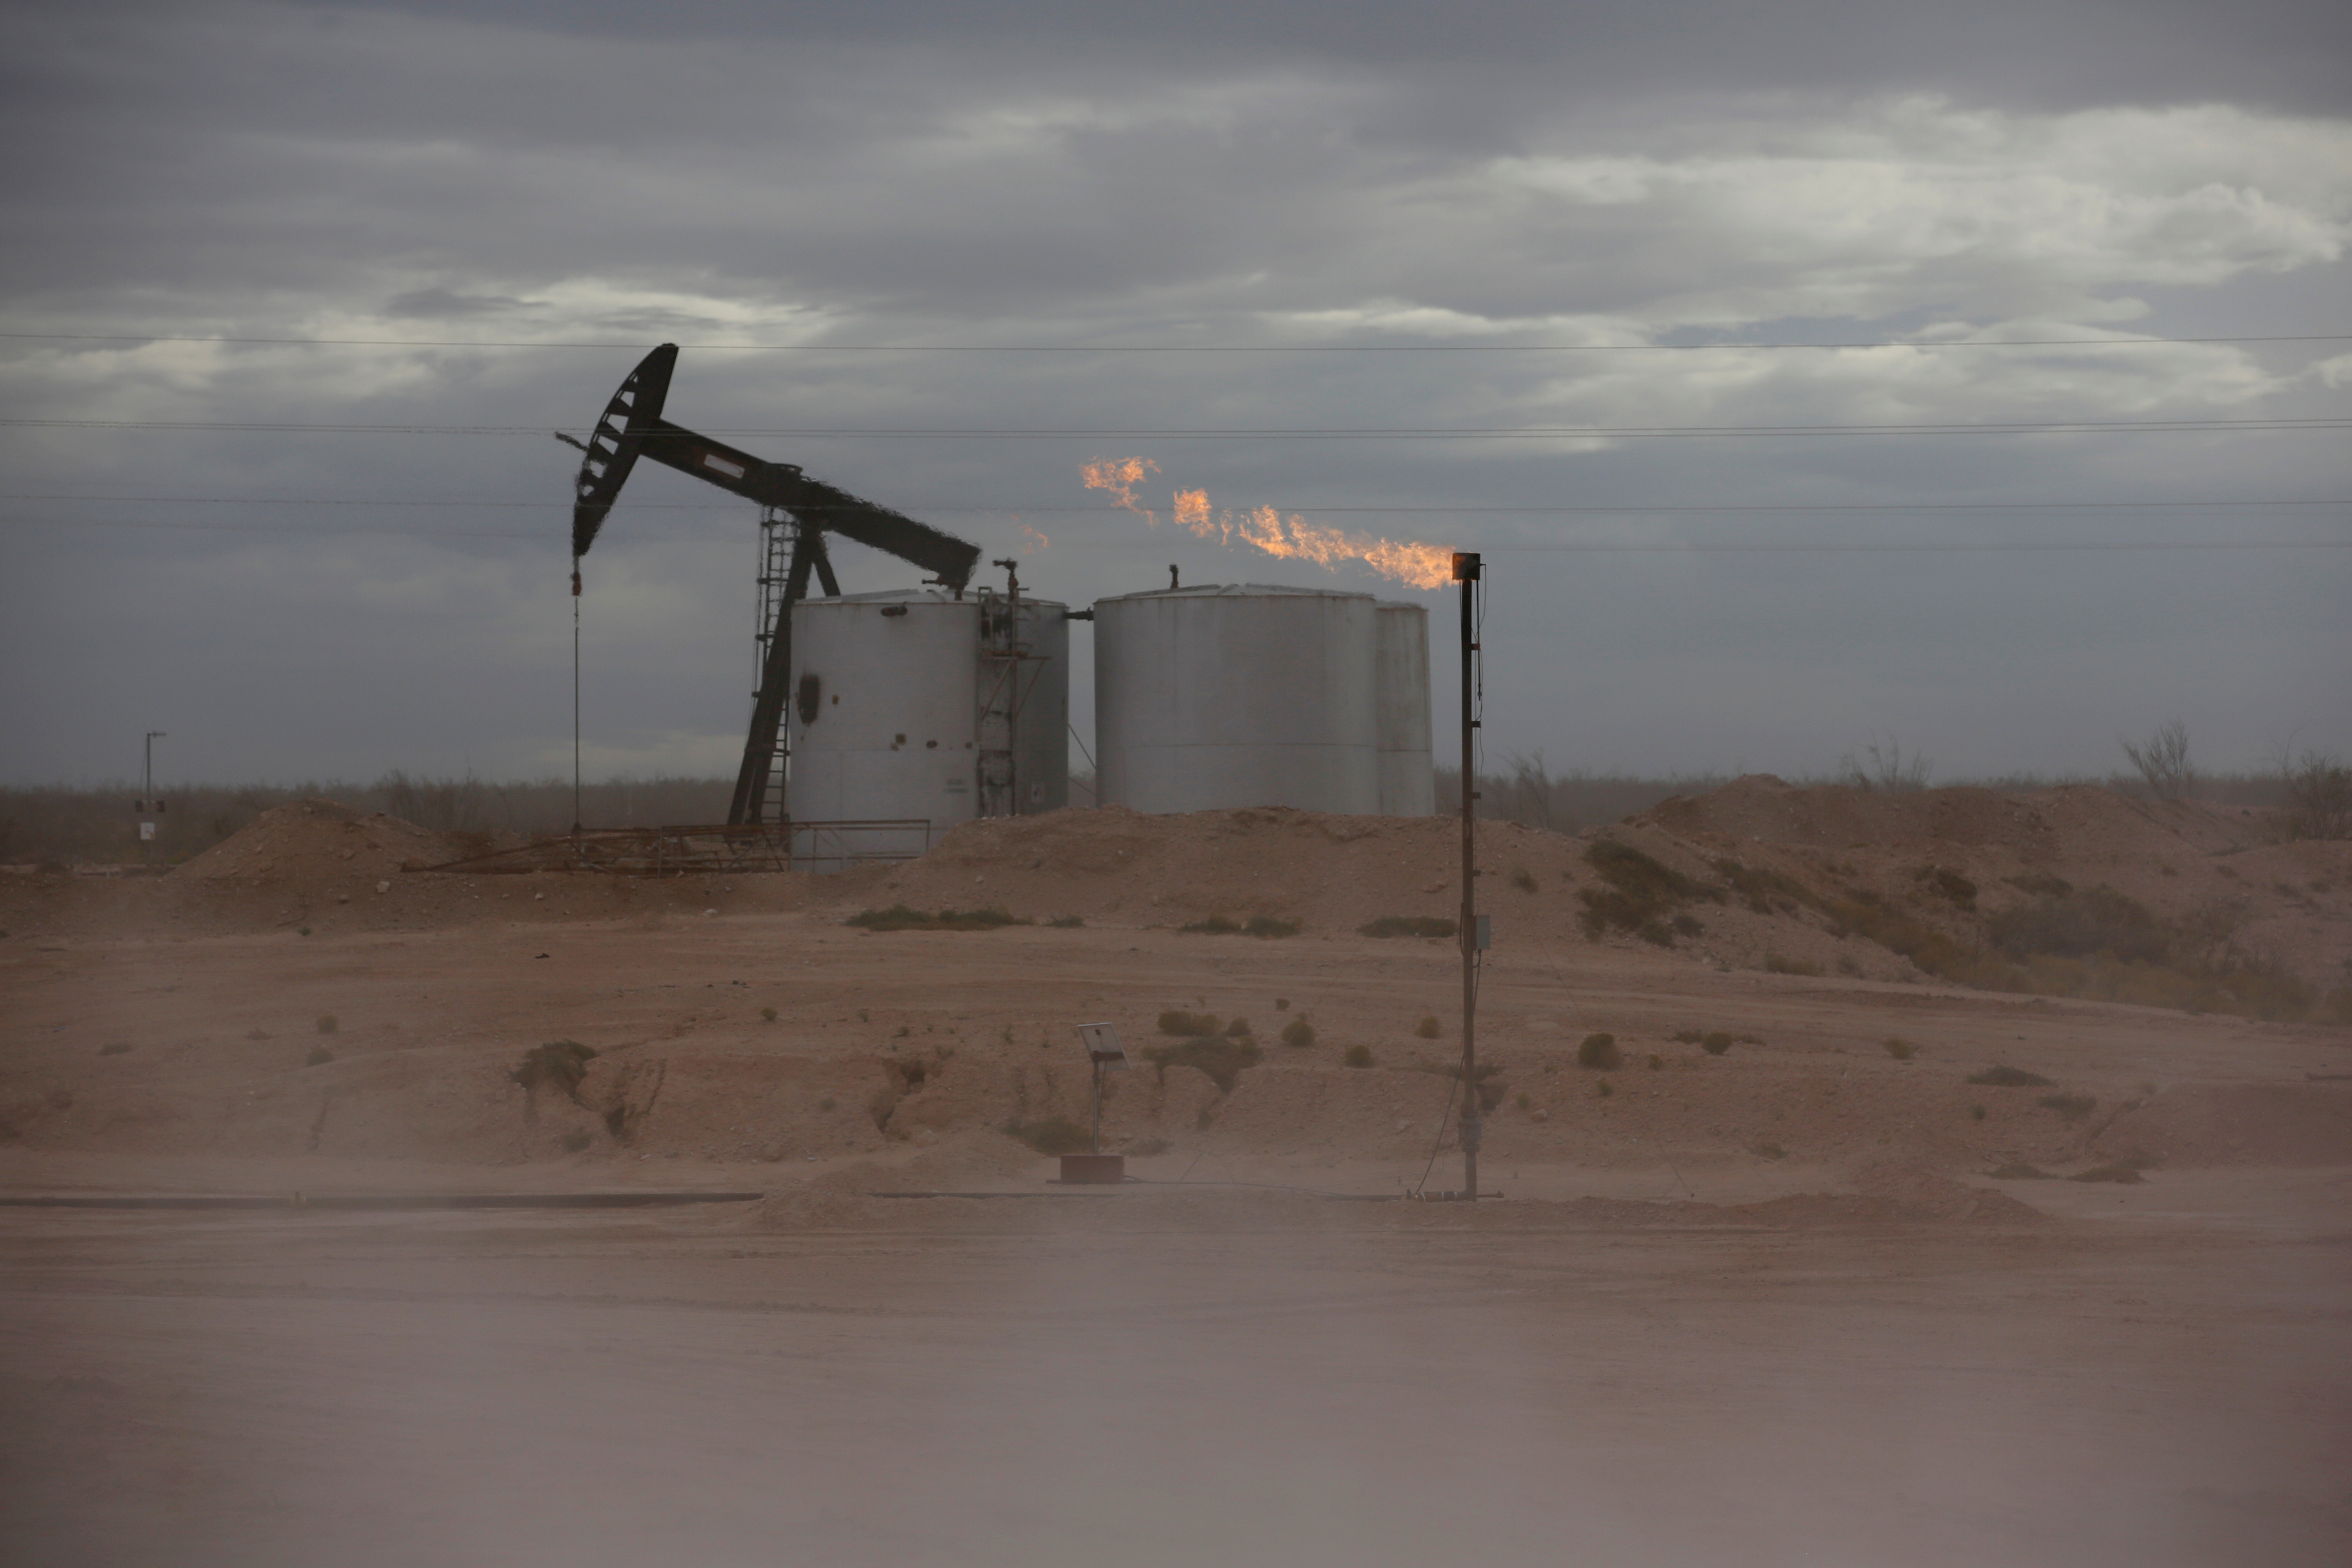 Dust blows around a crude oil pump jack and flare burning excess gas at a drill pad in the Permian Basin in Loving County, Texas, U.S. November 25, 2019.